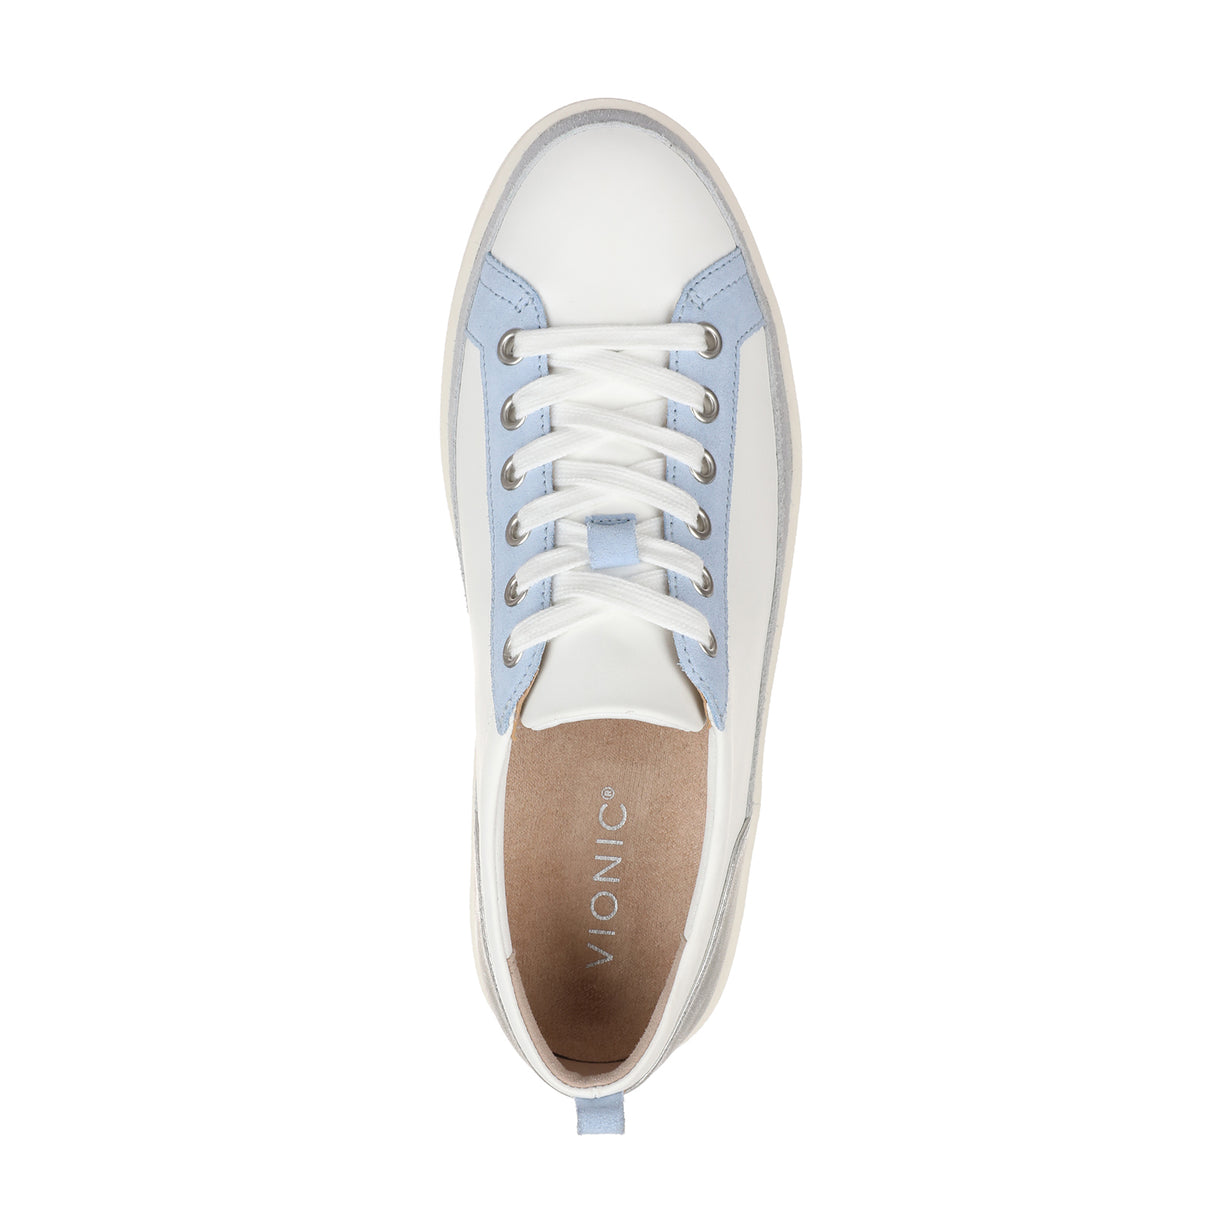 Vionic Winny (Women) - White/Silver Leather Athletic - Casual - Lace Up - The Heel Shoe Fitters